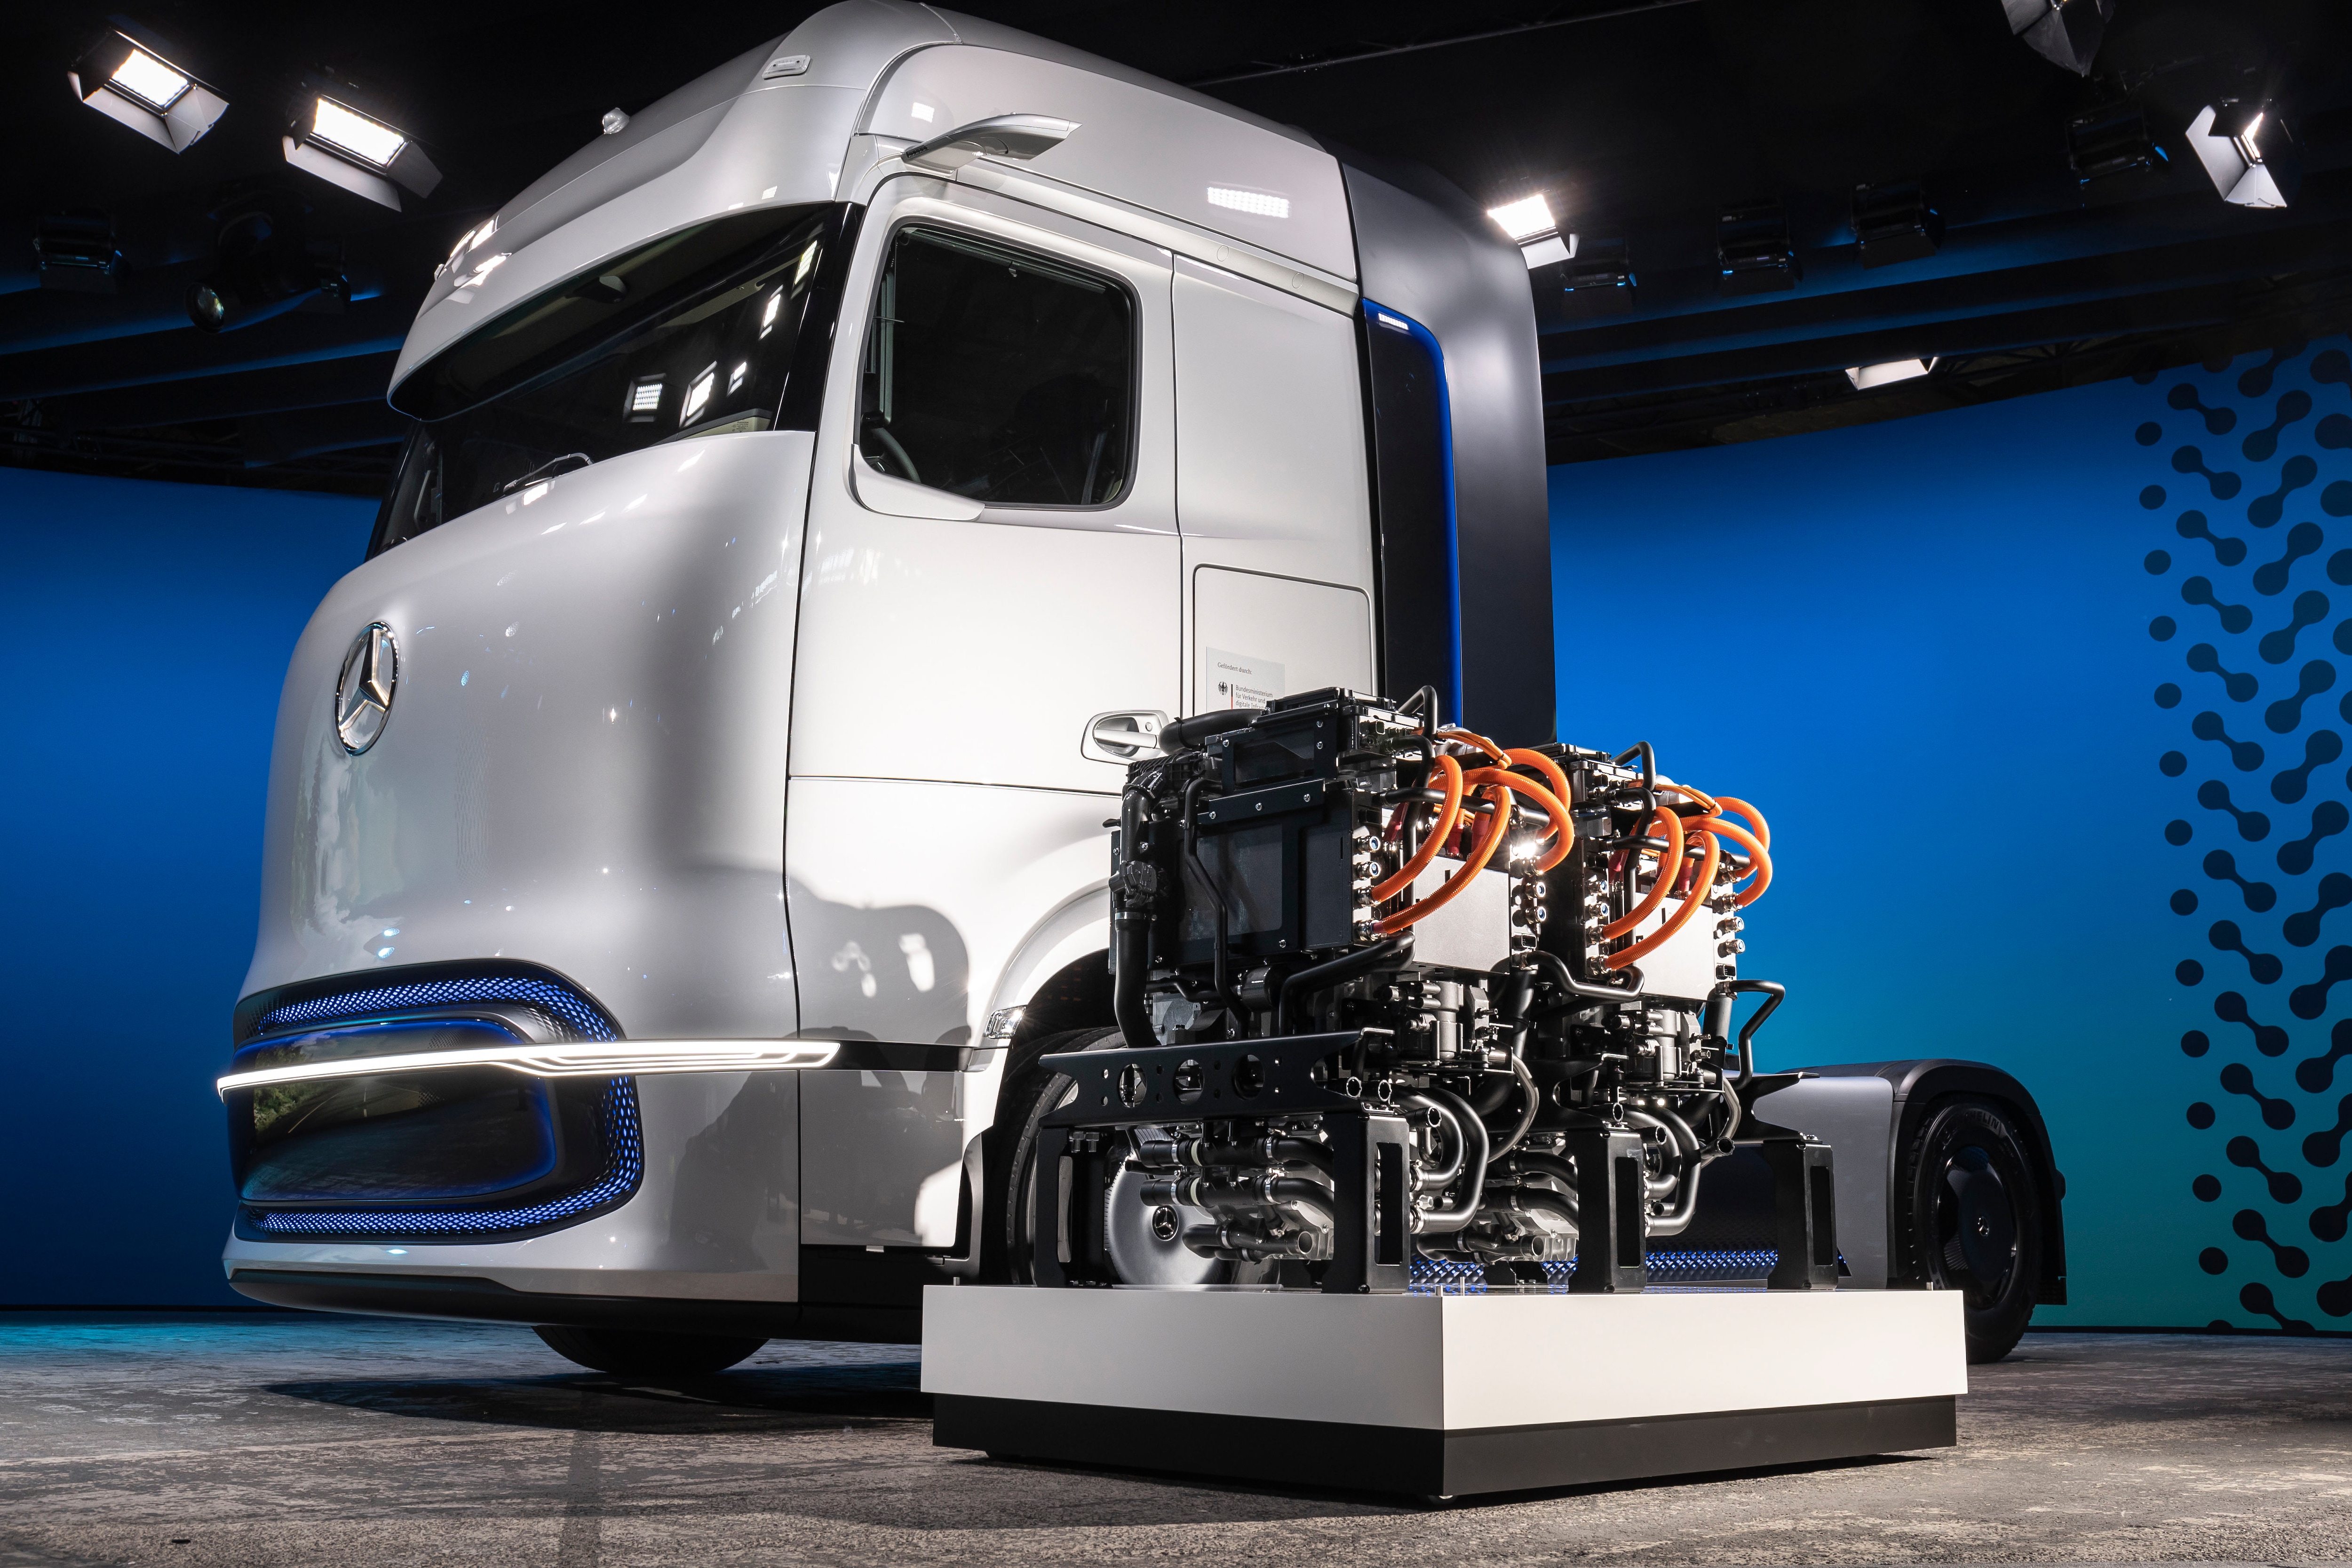 The GenH2 Truck has a range of up to 1,000 kilometers and more for flexible and demanding long-haul transport on a single tank of hydrogen.